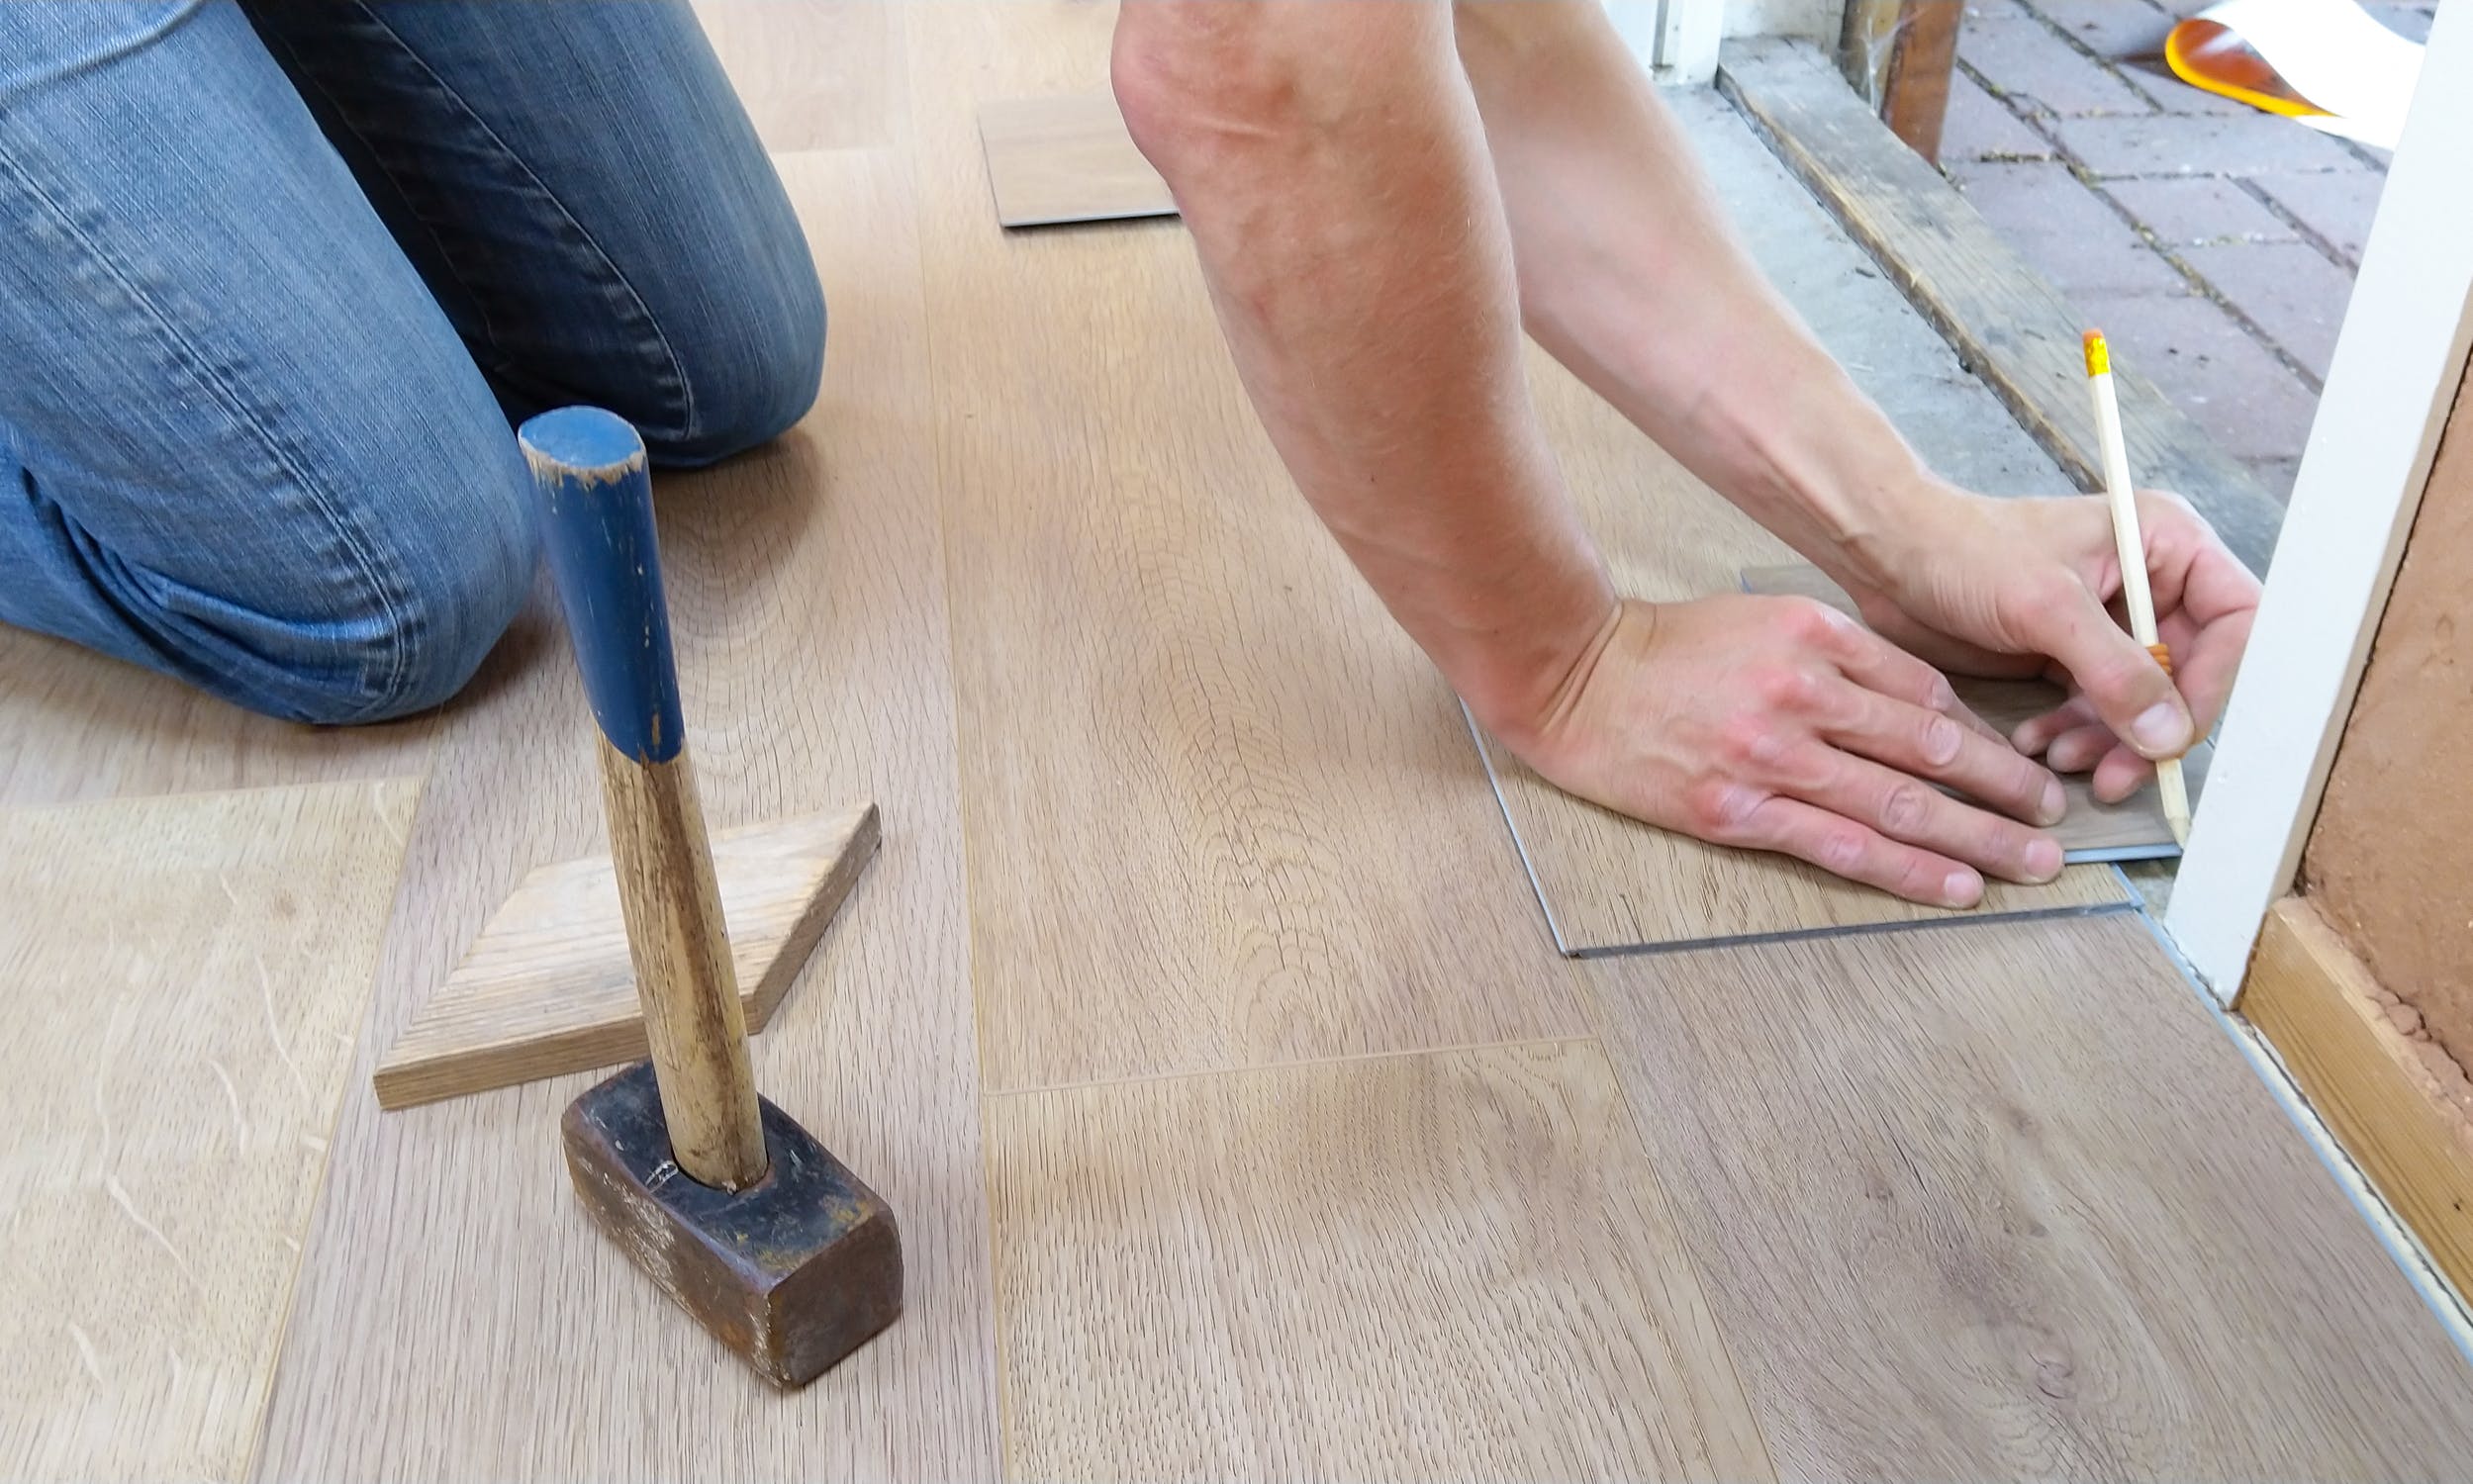 Should You Replace The Whole Floor Or Repair Some Sections?